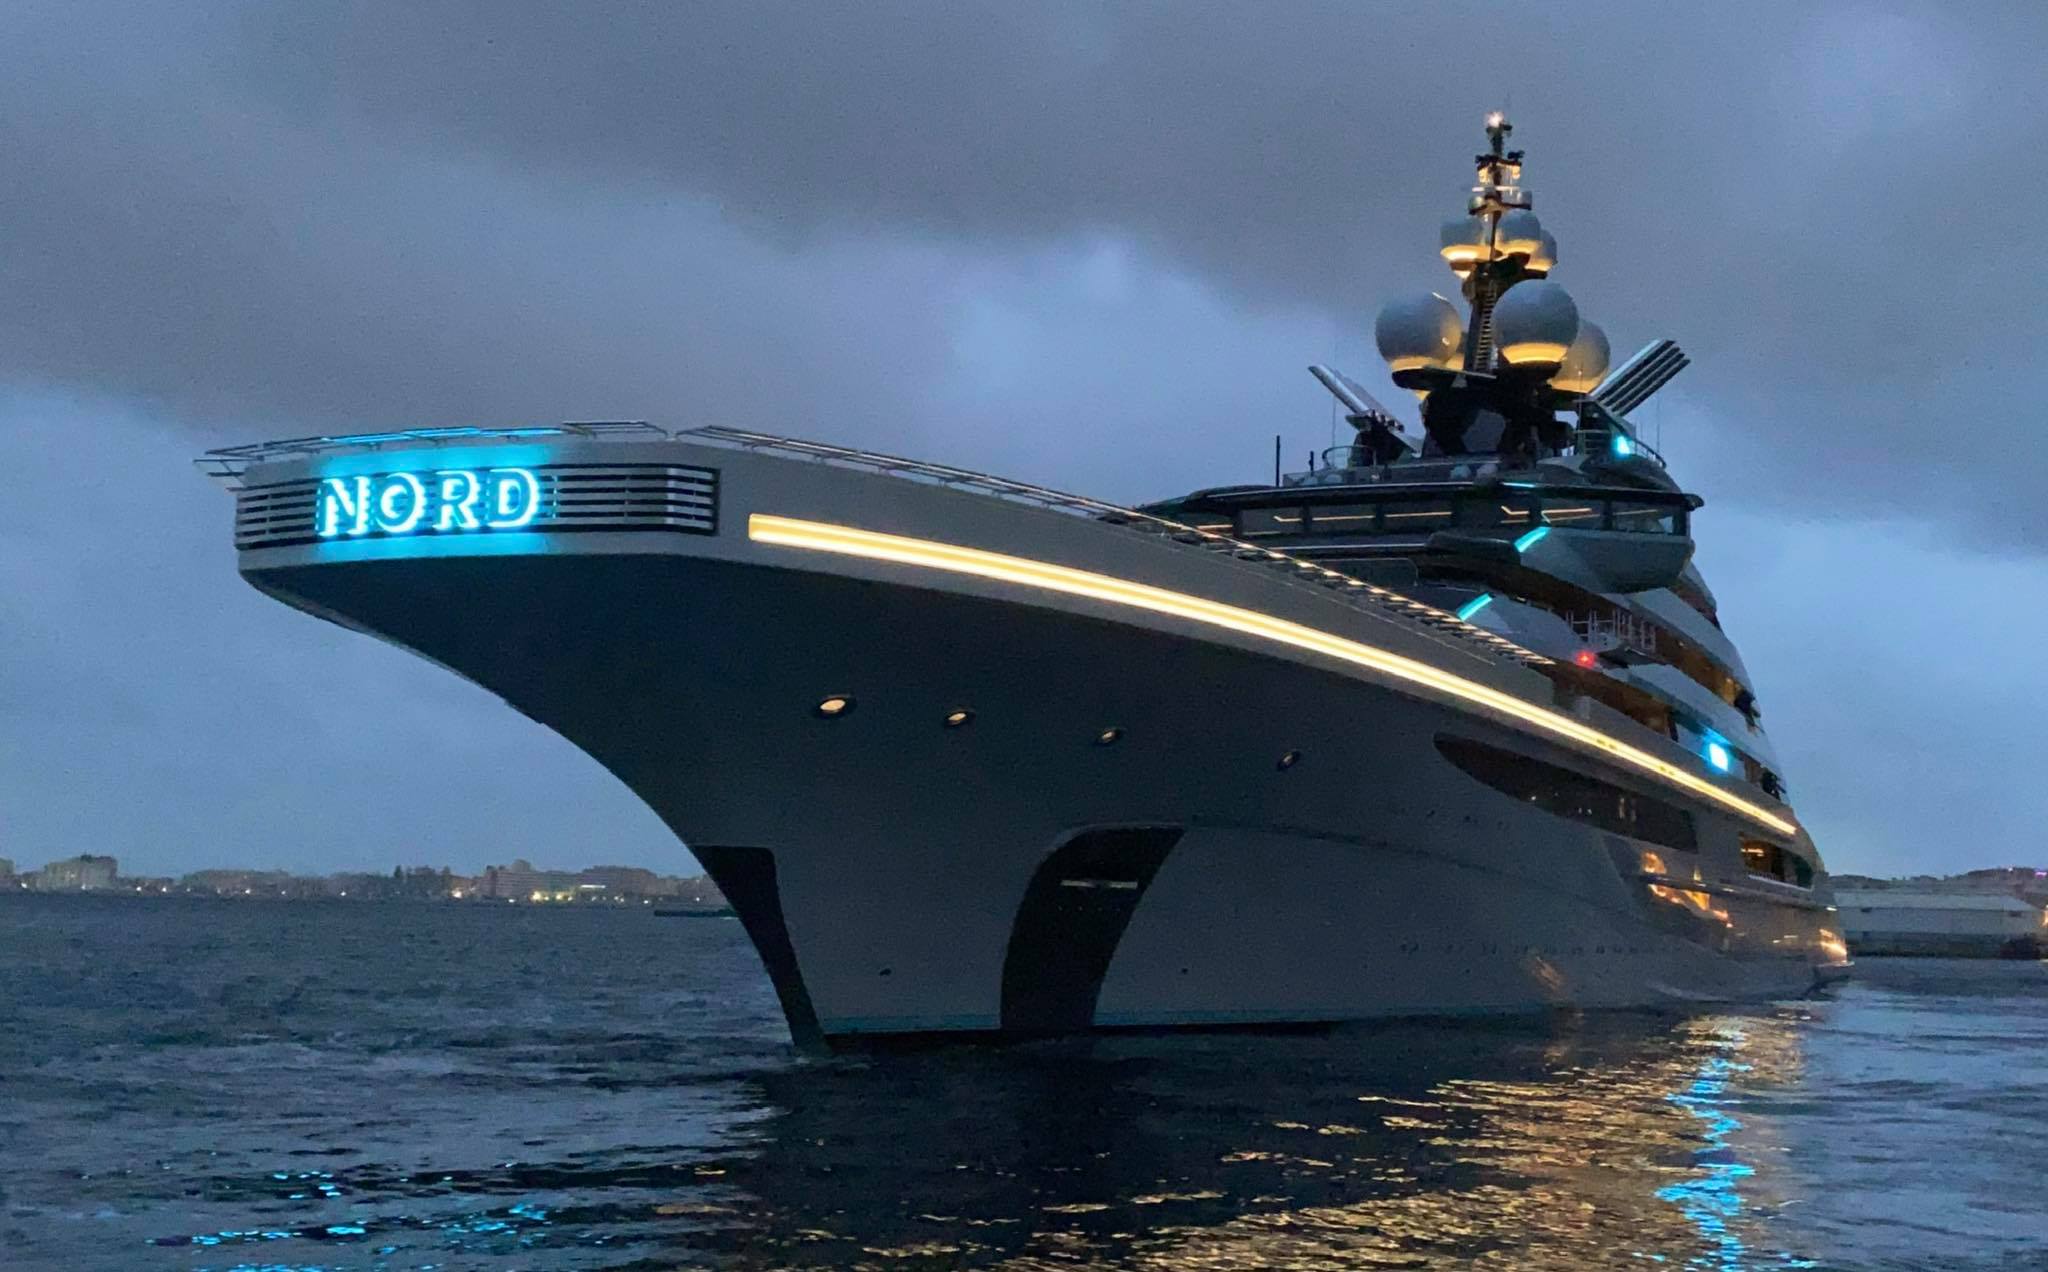 yacht nord helicopter